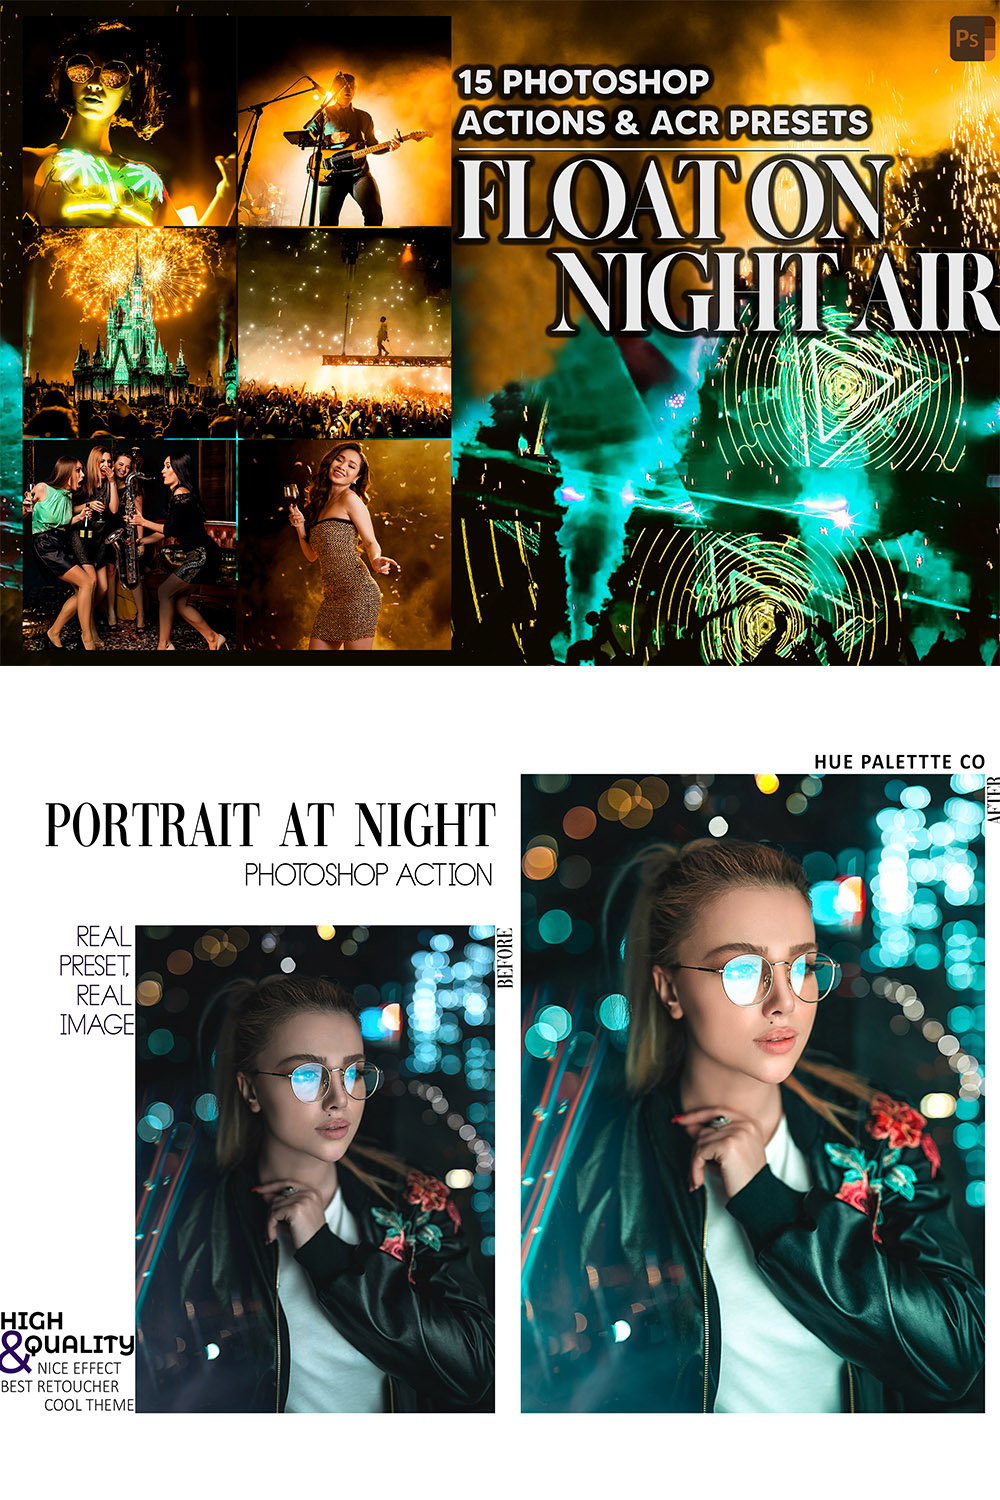 15 Photoshop Actions, Float On Night Air Ps Action, Concert ACR Preset, Party Ps Filter, Atn Portrait And Lifestyle Theme Instagram Blogger pinterest preview image.